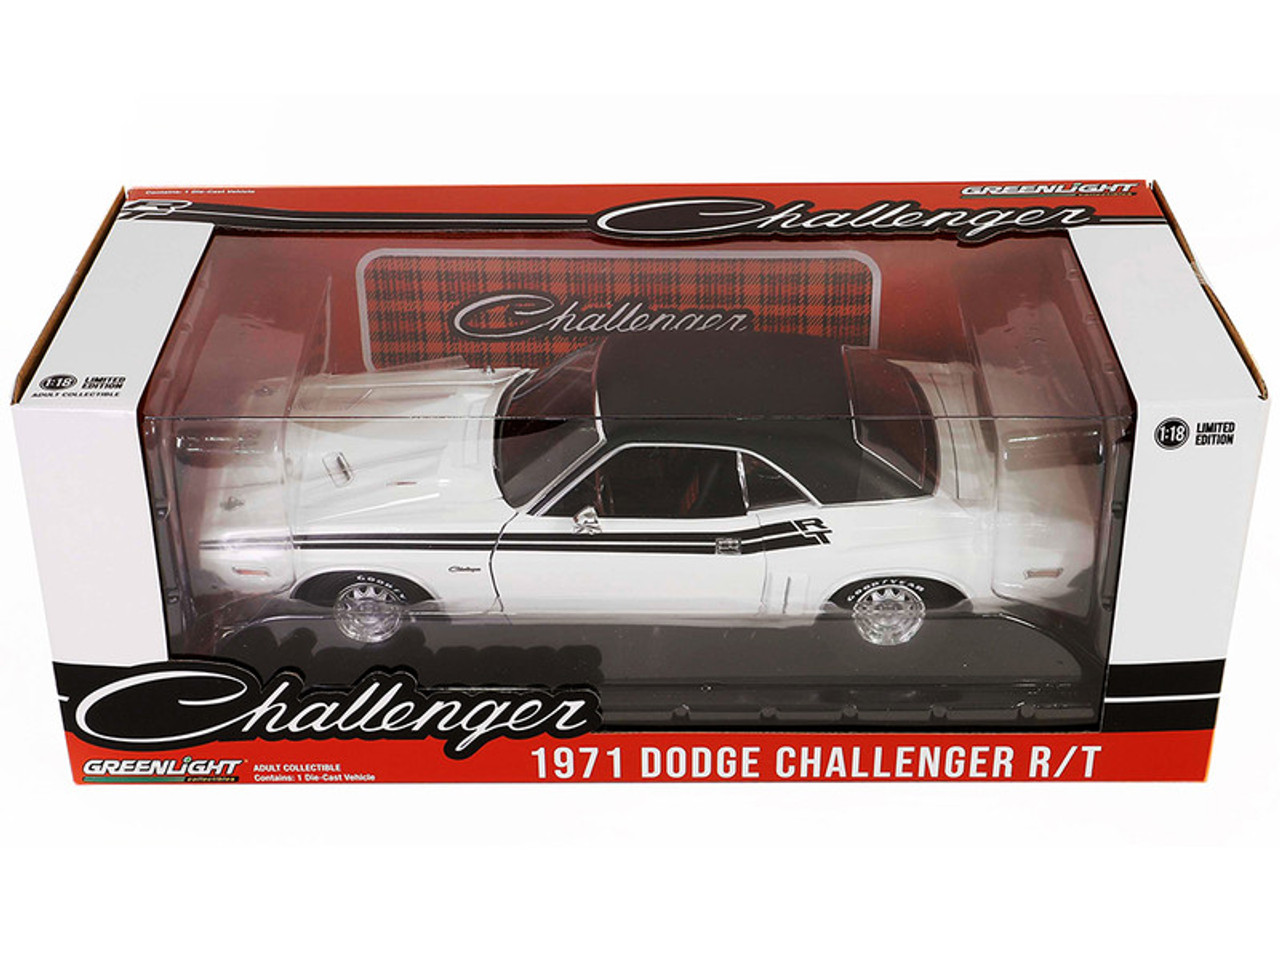 1971 Dodge Challenger R/T - Bright White with Black Interior and Red Plaid Seats - 1:18 Diecast Model by Greenlight